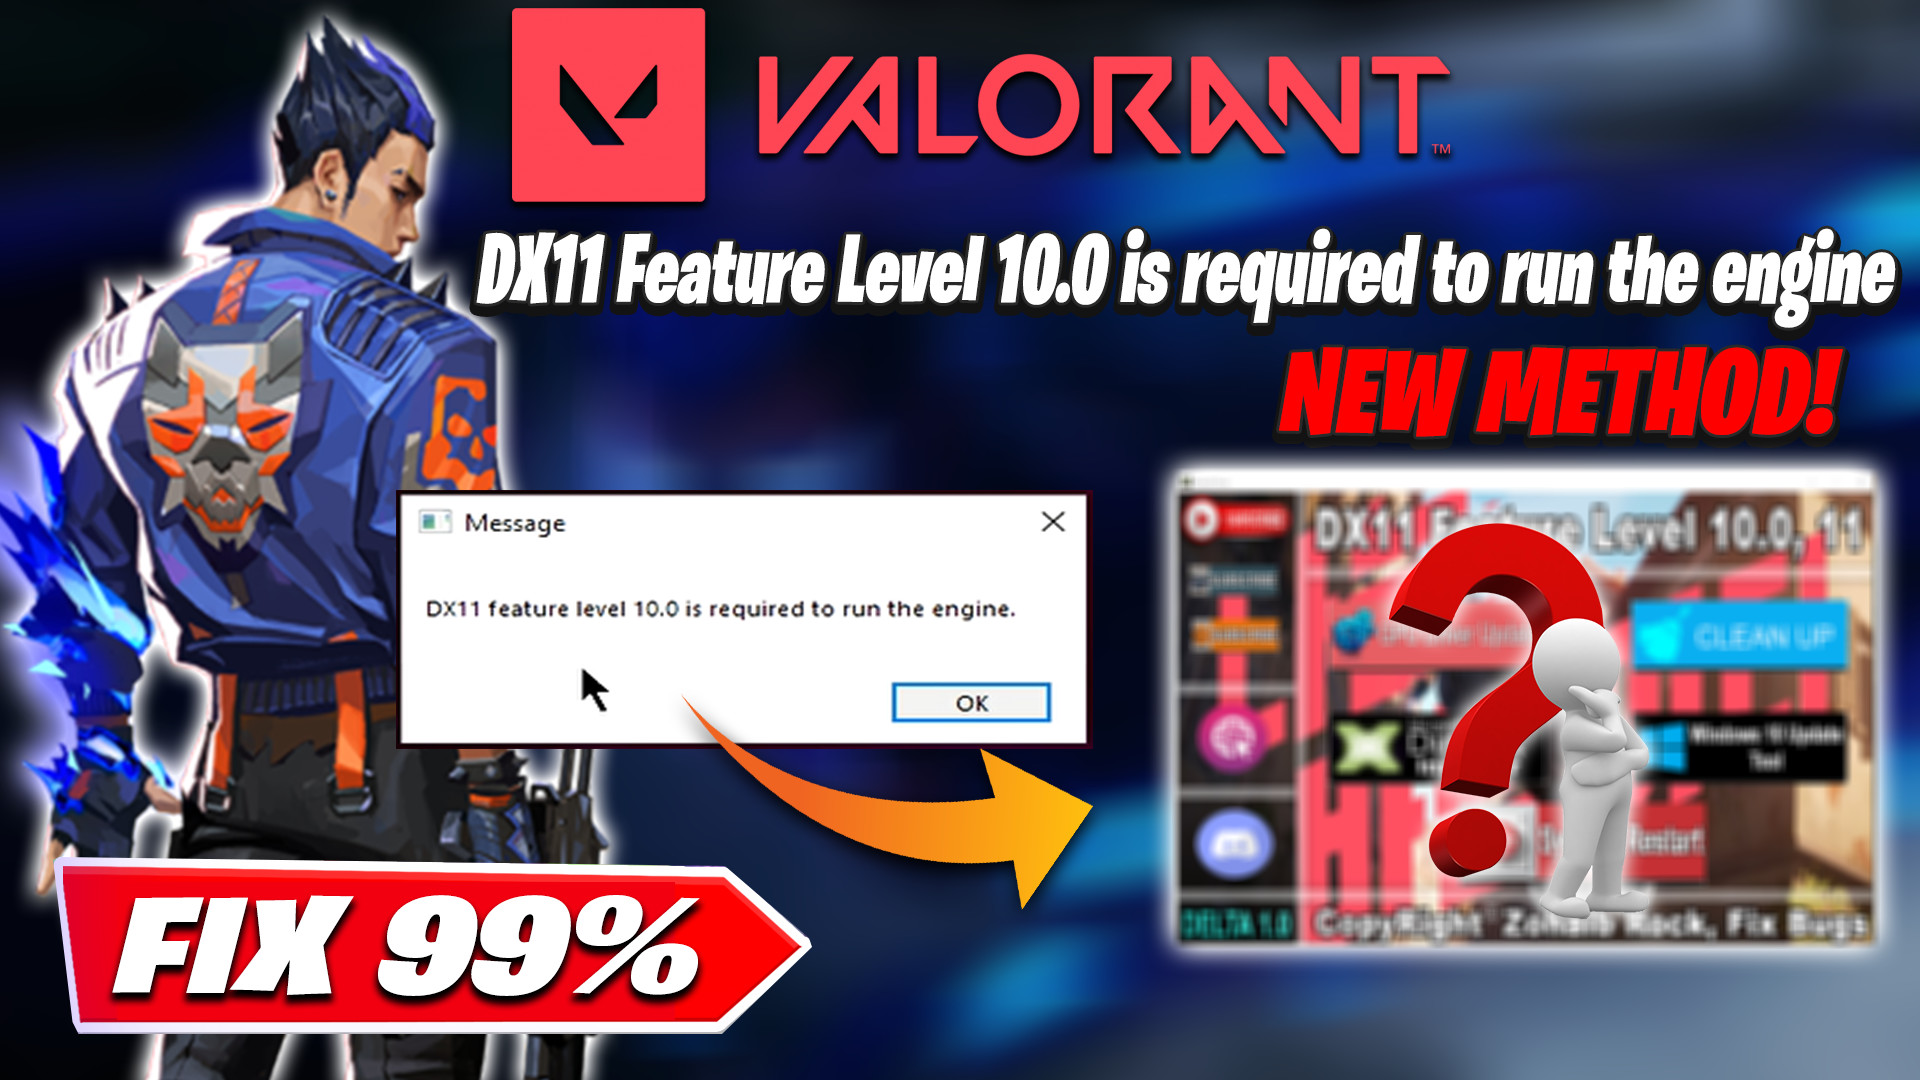 Dx11 feature Level 10.0 is required to Run the engine valorant. Dx11 feature Level 10.0 is required to Run the engine как исправить. A d3d11-compatible GPU (feature Level 11.0,Shader model 5.0) is required to Run the engine valorant.